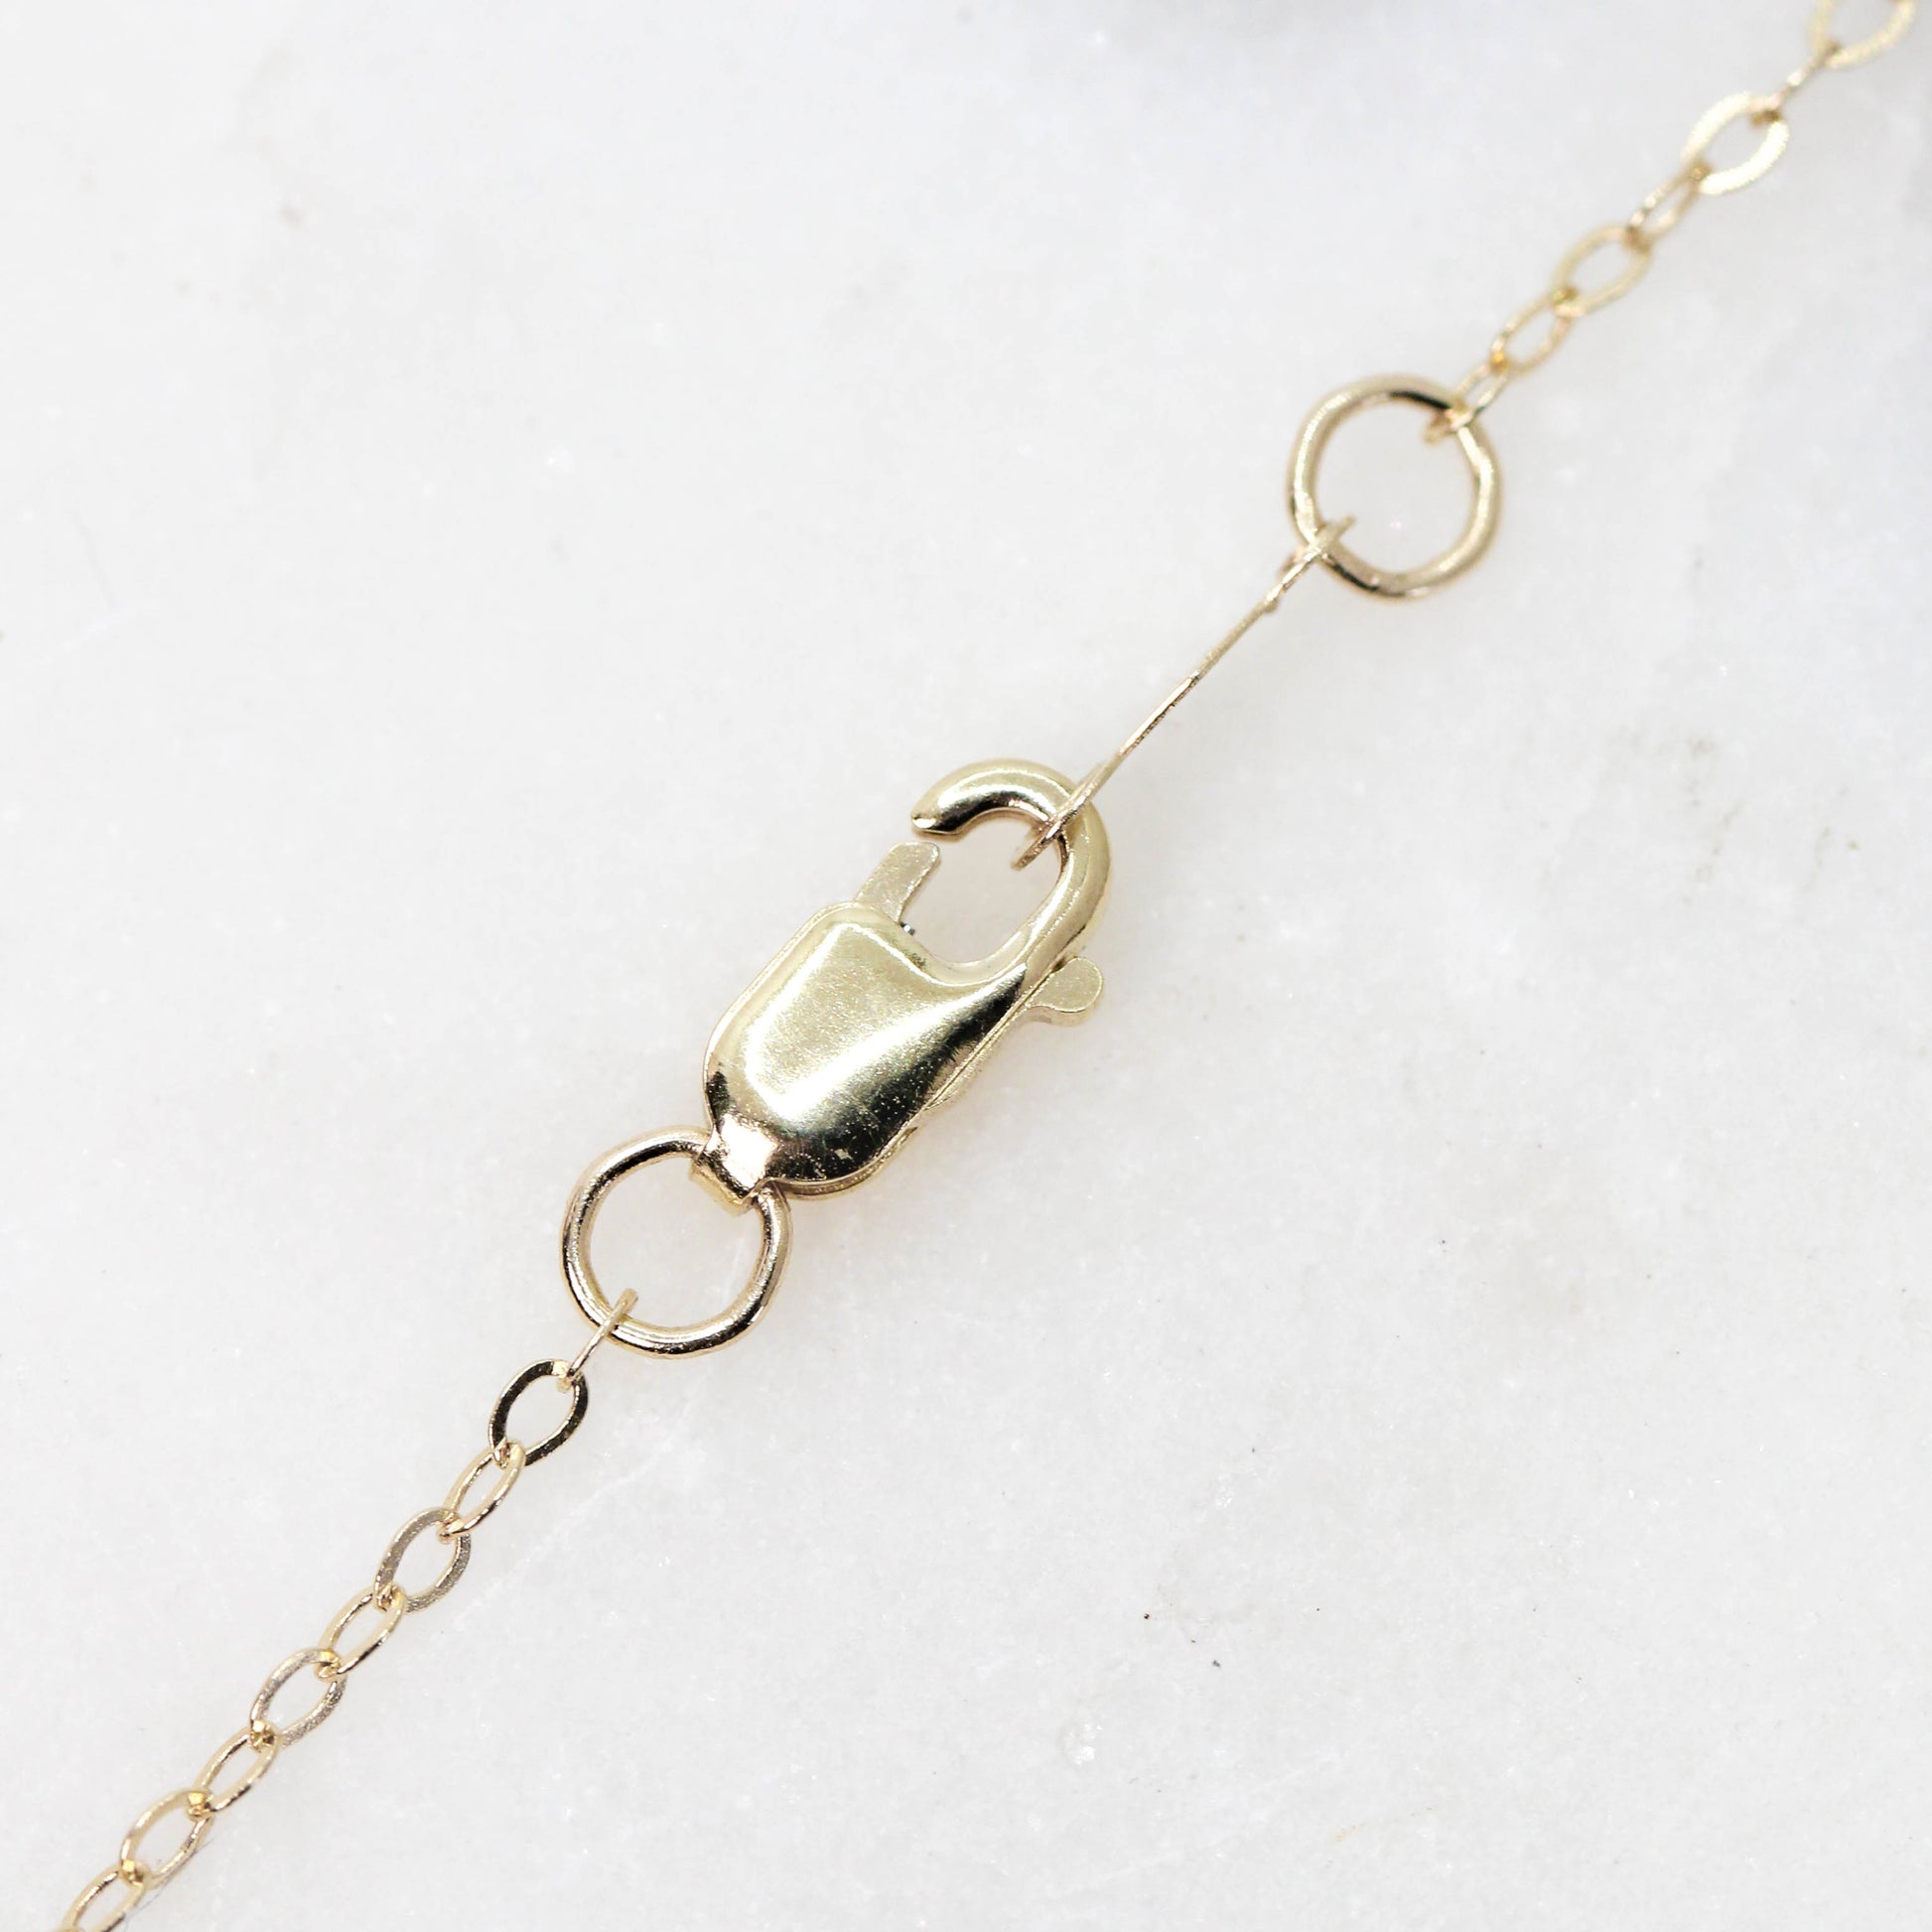 Christina Necklace with a 0.73 Carat Dark Gray Pear Diamond and White Accent Diamonds in 14k Yellow Gold - Ready to Ship - Midwinter Co. Alternative Bridal Rings and Modern Fine Jewelry